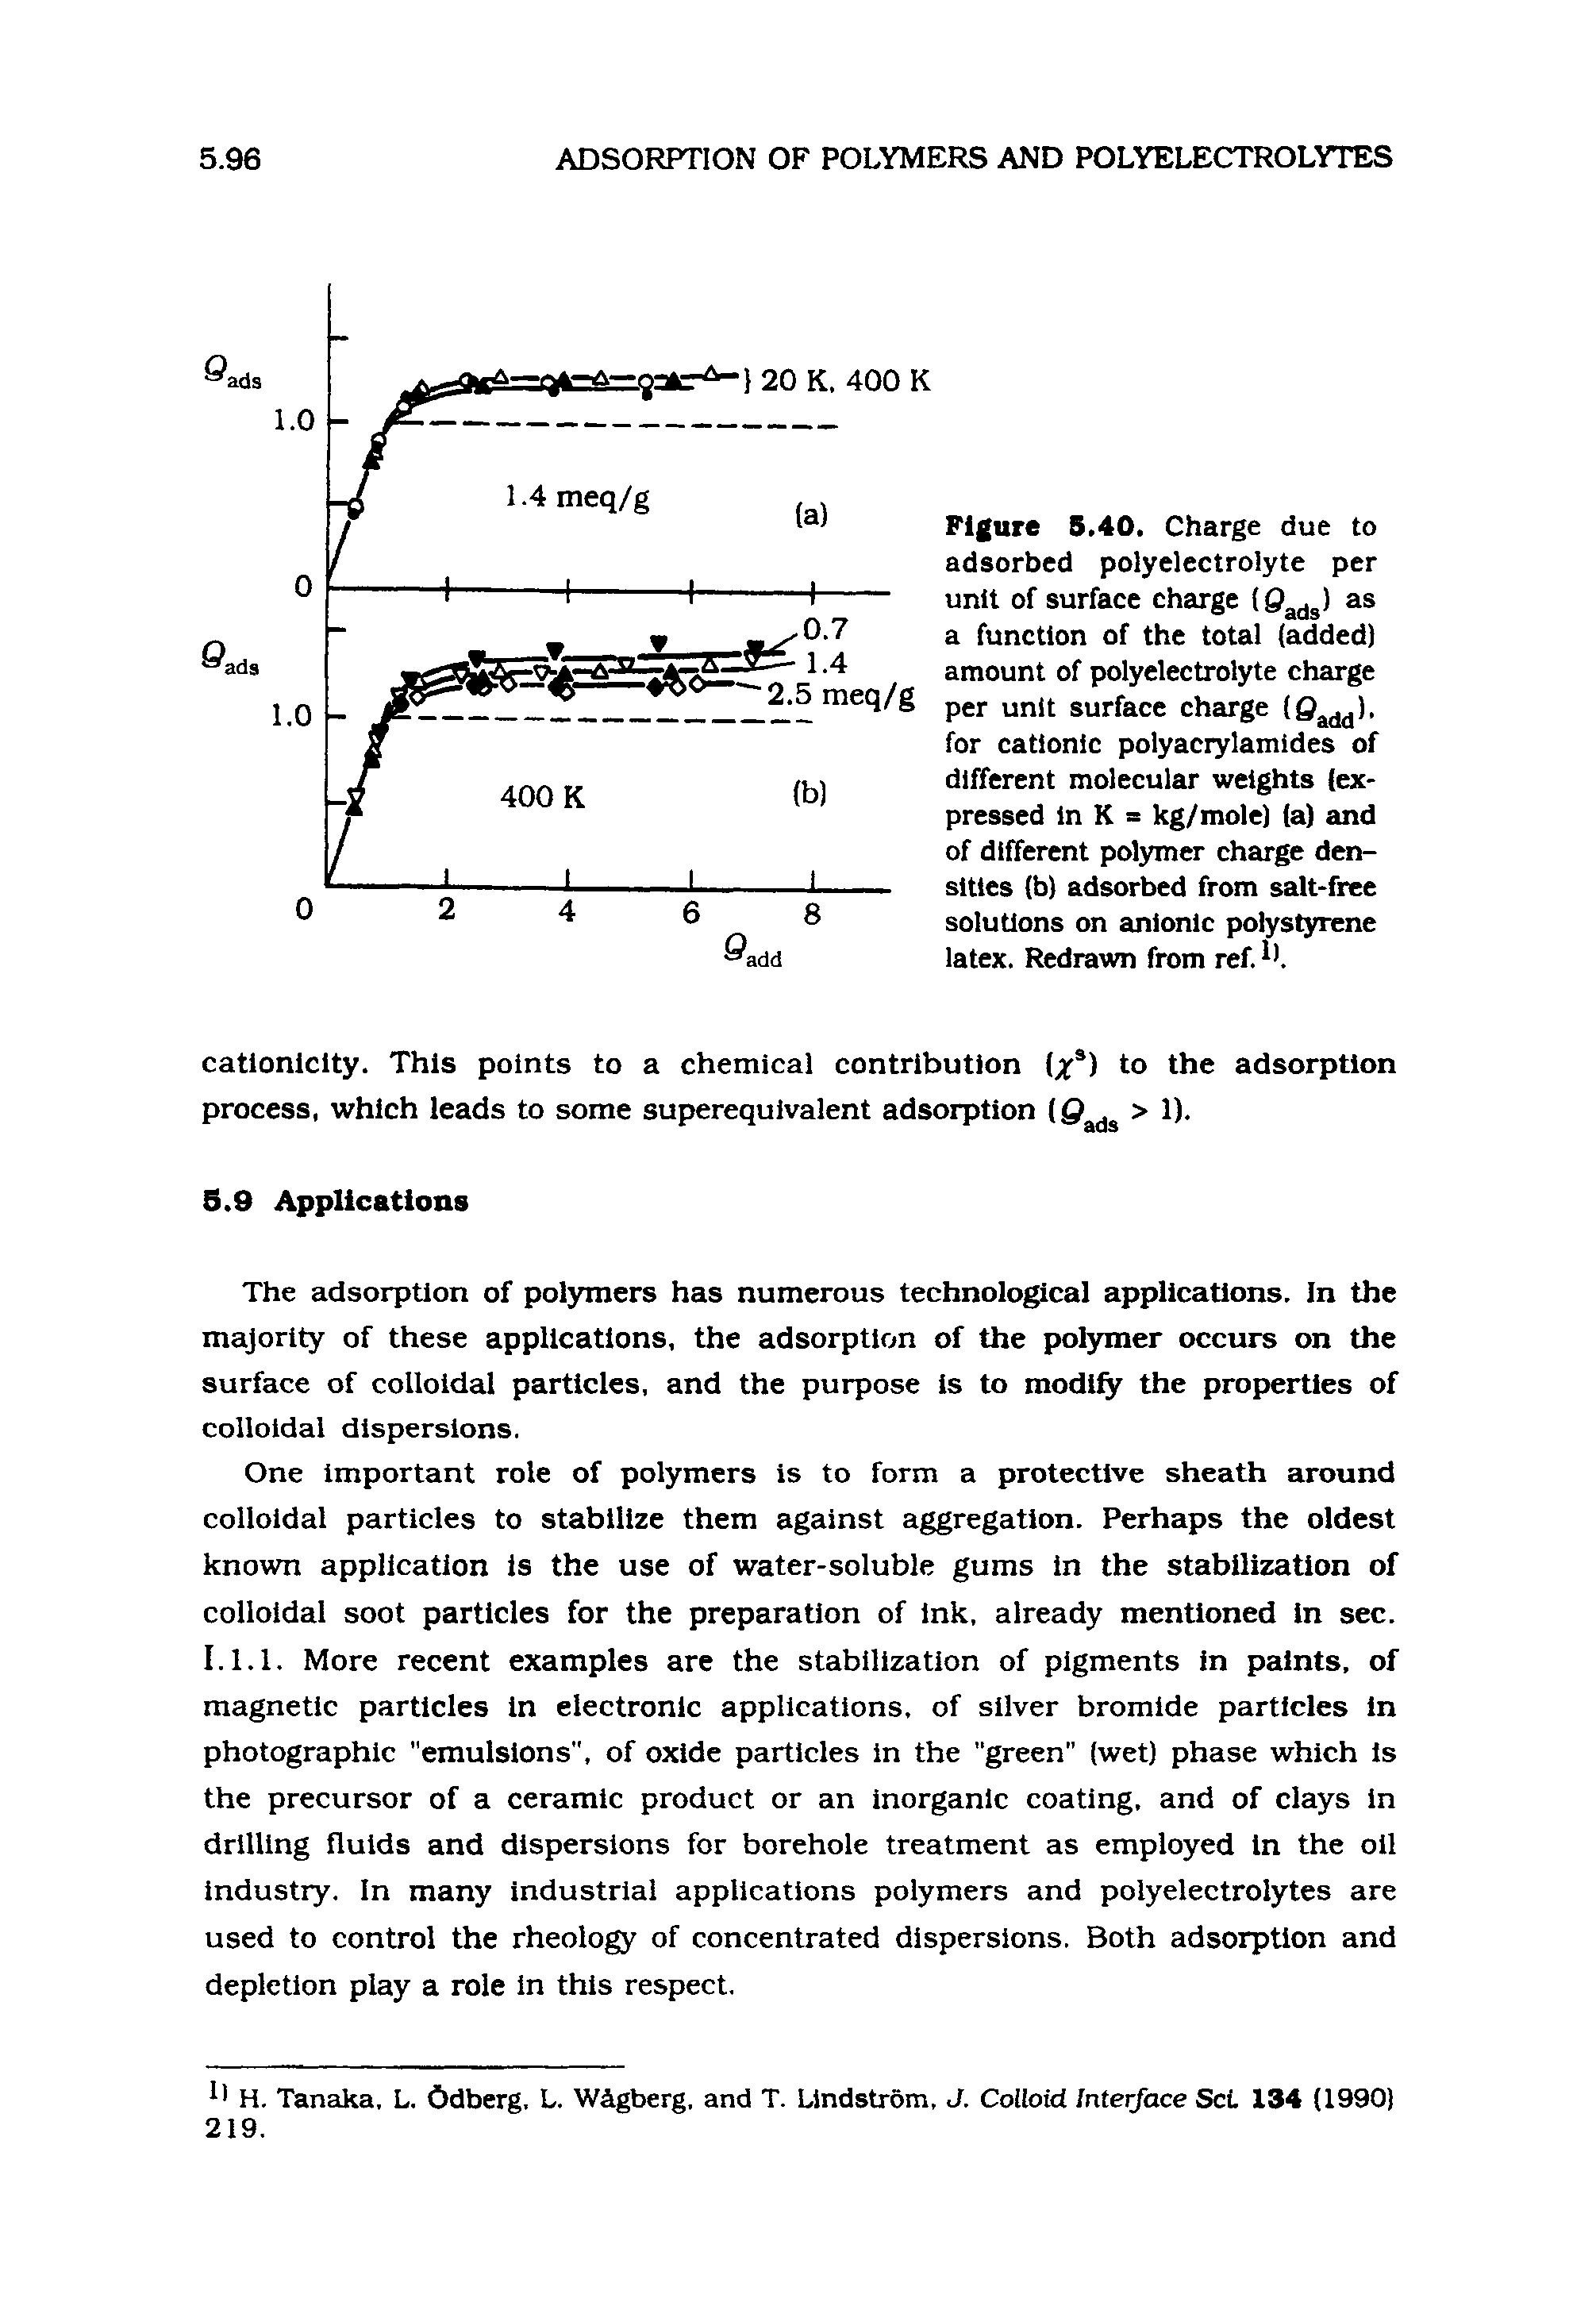 Figure S.40. Charge due to adsorbed polyelectrolyte per unit of surface charge (Sa s) as a function of the total (added) amount of polyelectrolyte charge per unit surface charge (9 ). for cationic polyacrylamides of different molecular weights (expressed in K 3 kg/mole) (a) and of different polymer charge densities (b) adsorbed from salt-free solutions on anionic polyst3TFene latex. Redrawn from ref.